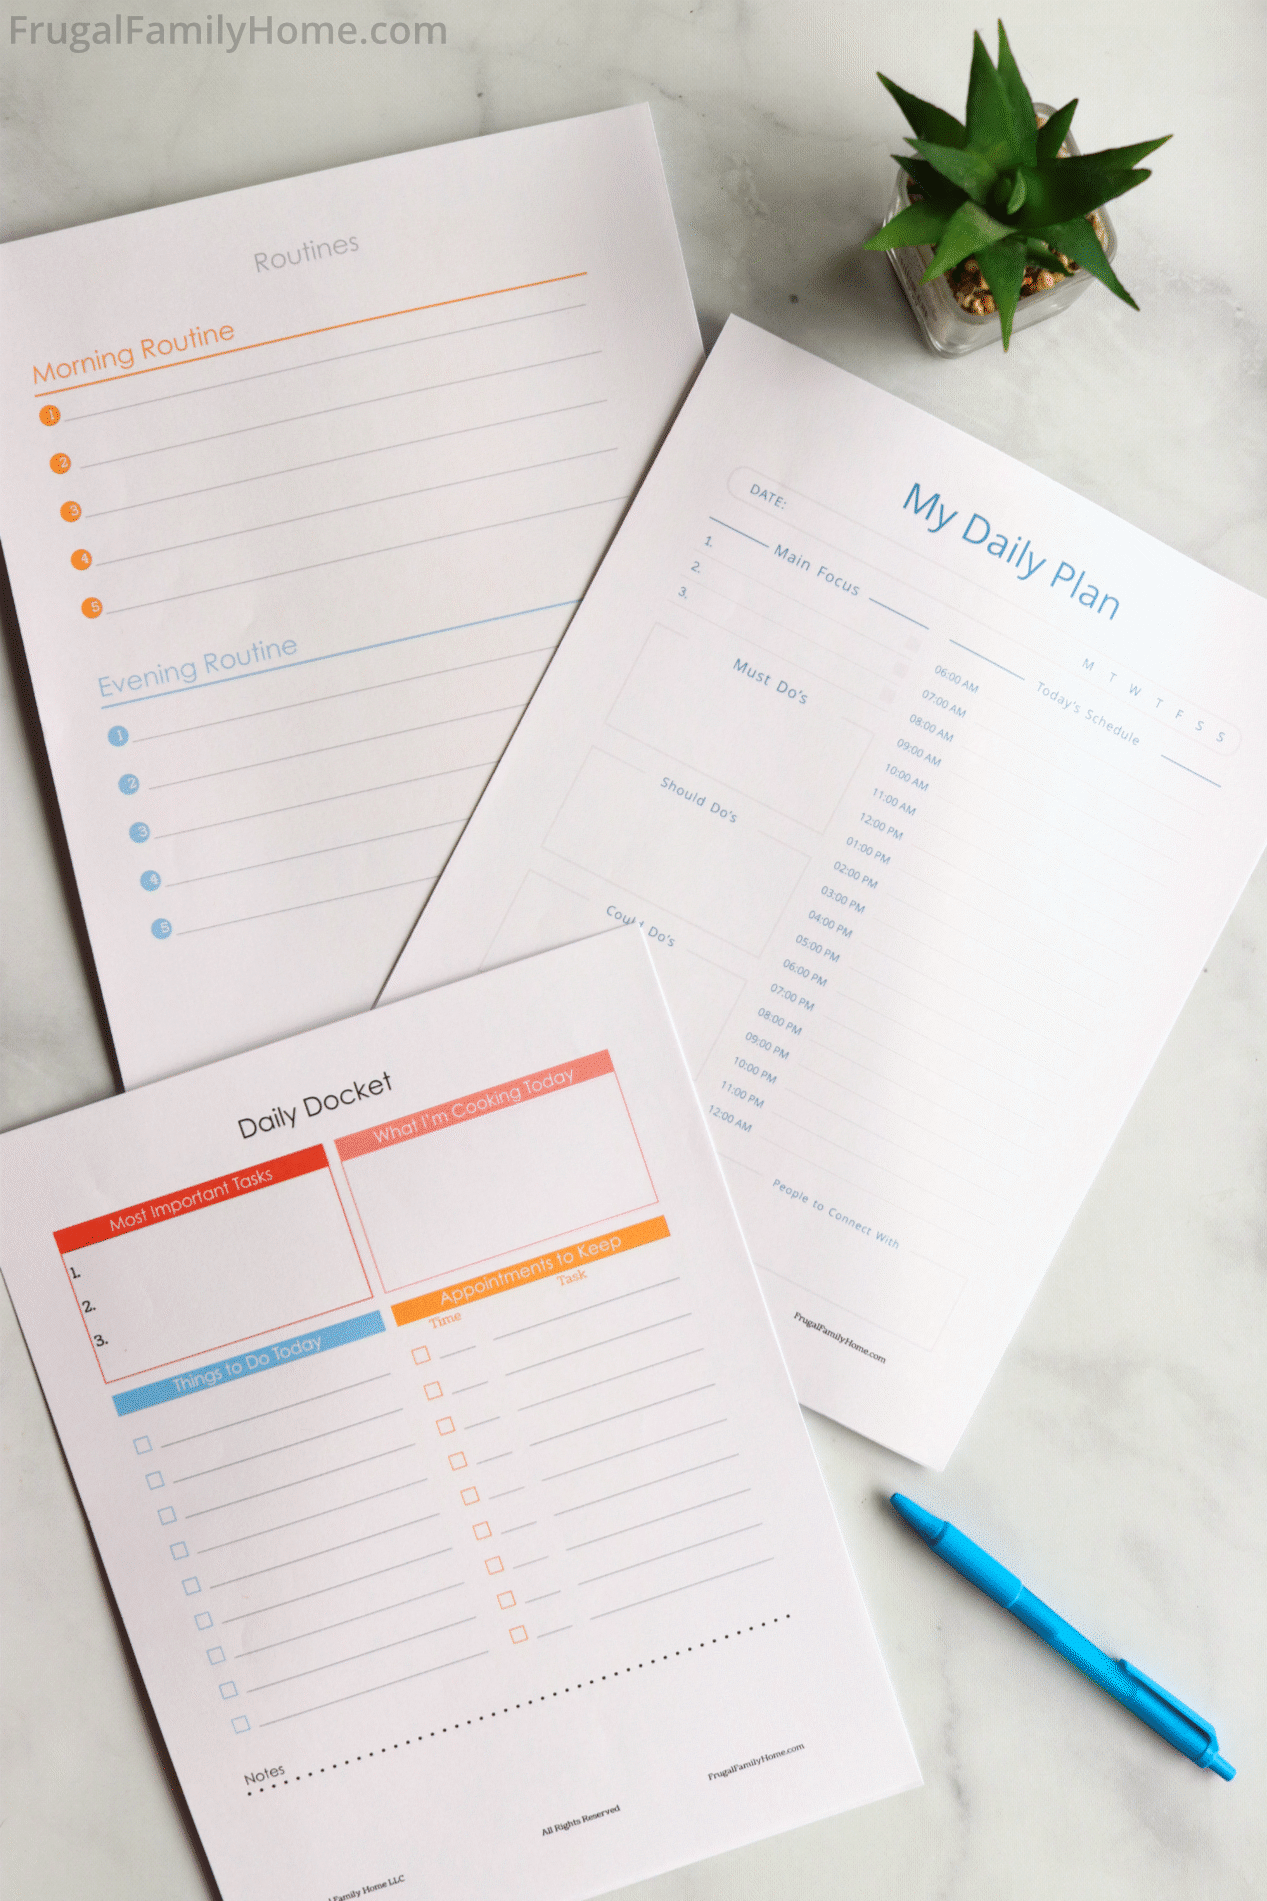 A few of the daily planning pages in the Chaos to Calm Life Planner